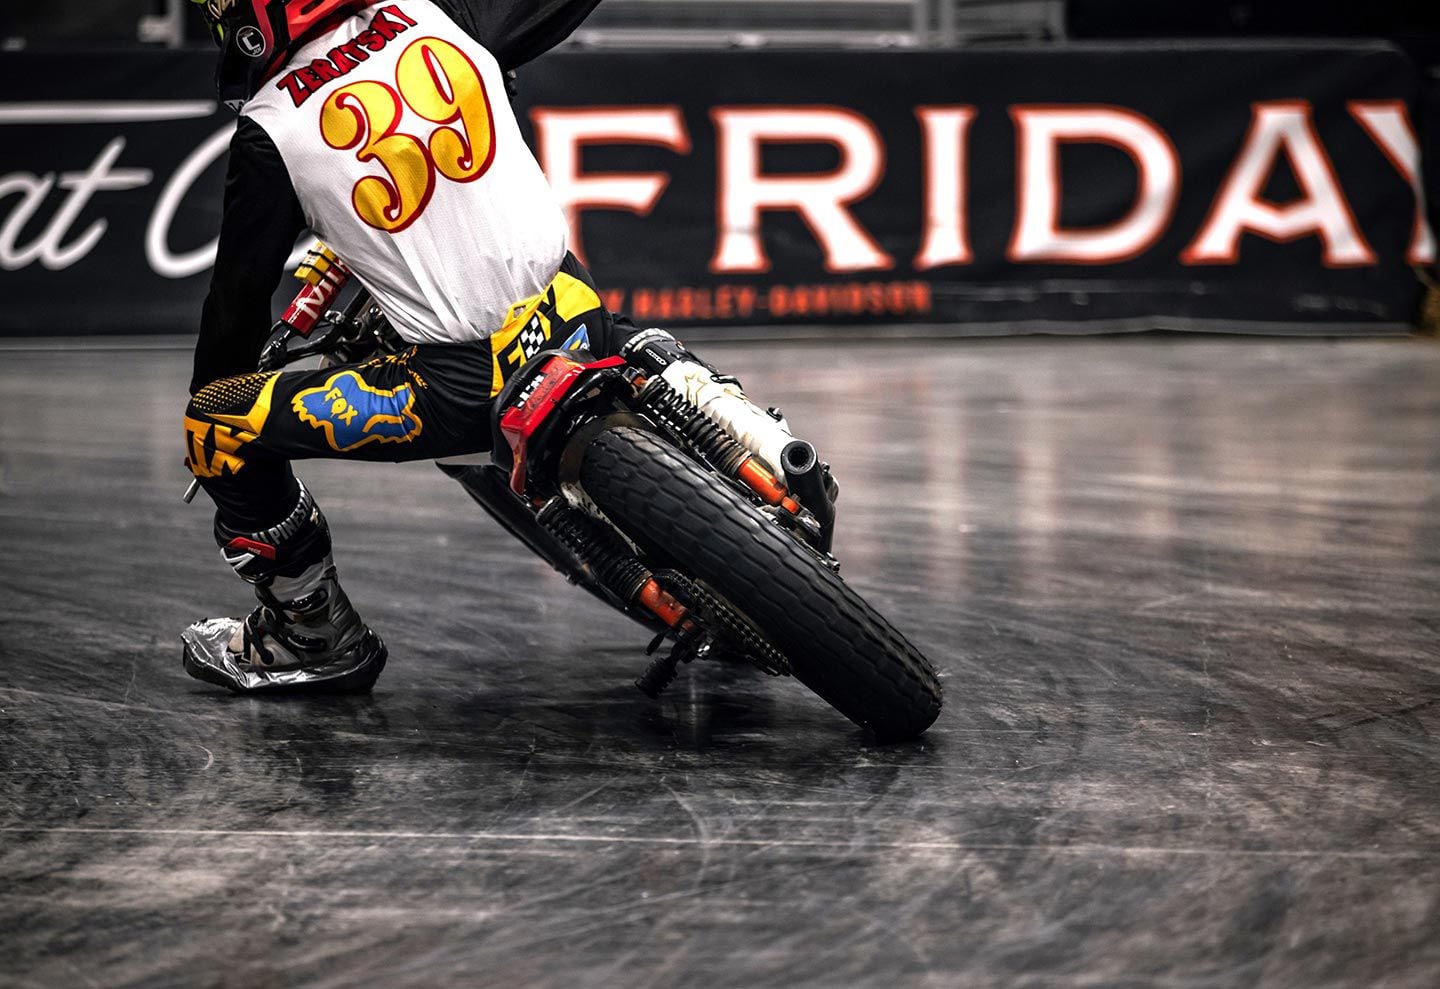 For the first time, The One Show organizers partnered up with Milwaukee’s Flat Out Friday crew to run the separate flat-track component of the event.